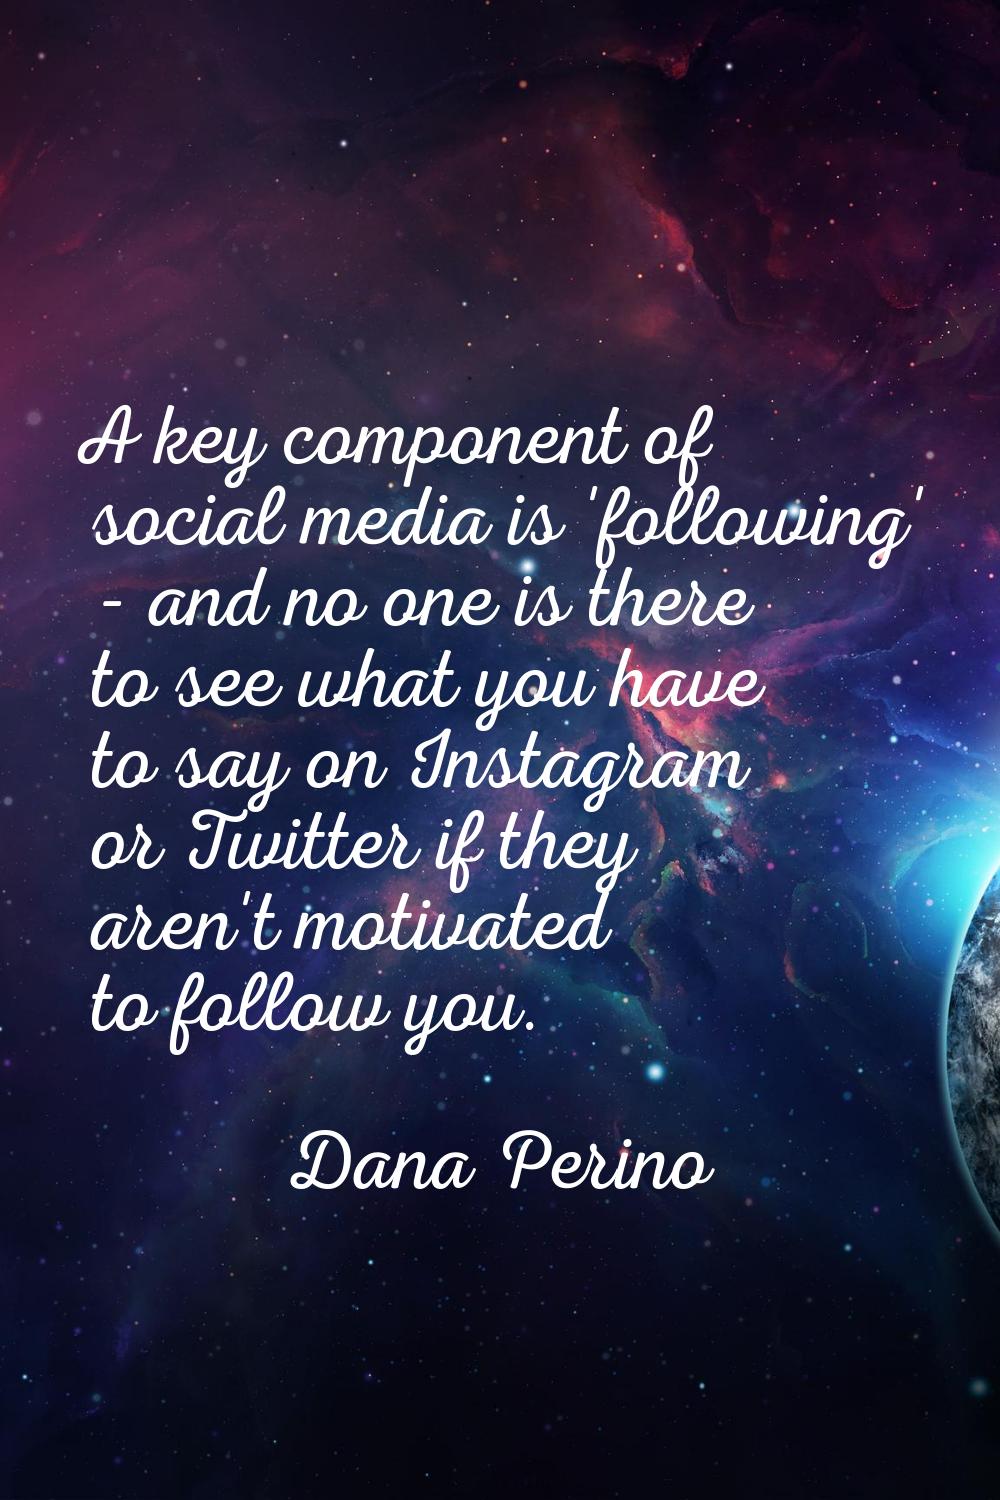 A key component of social media is 'following' - and no one is there to see what you have to say on